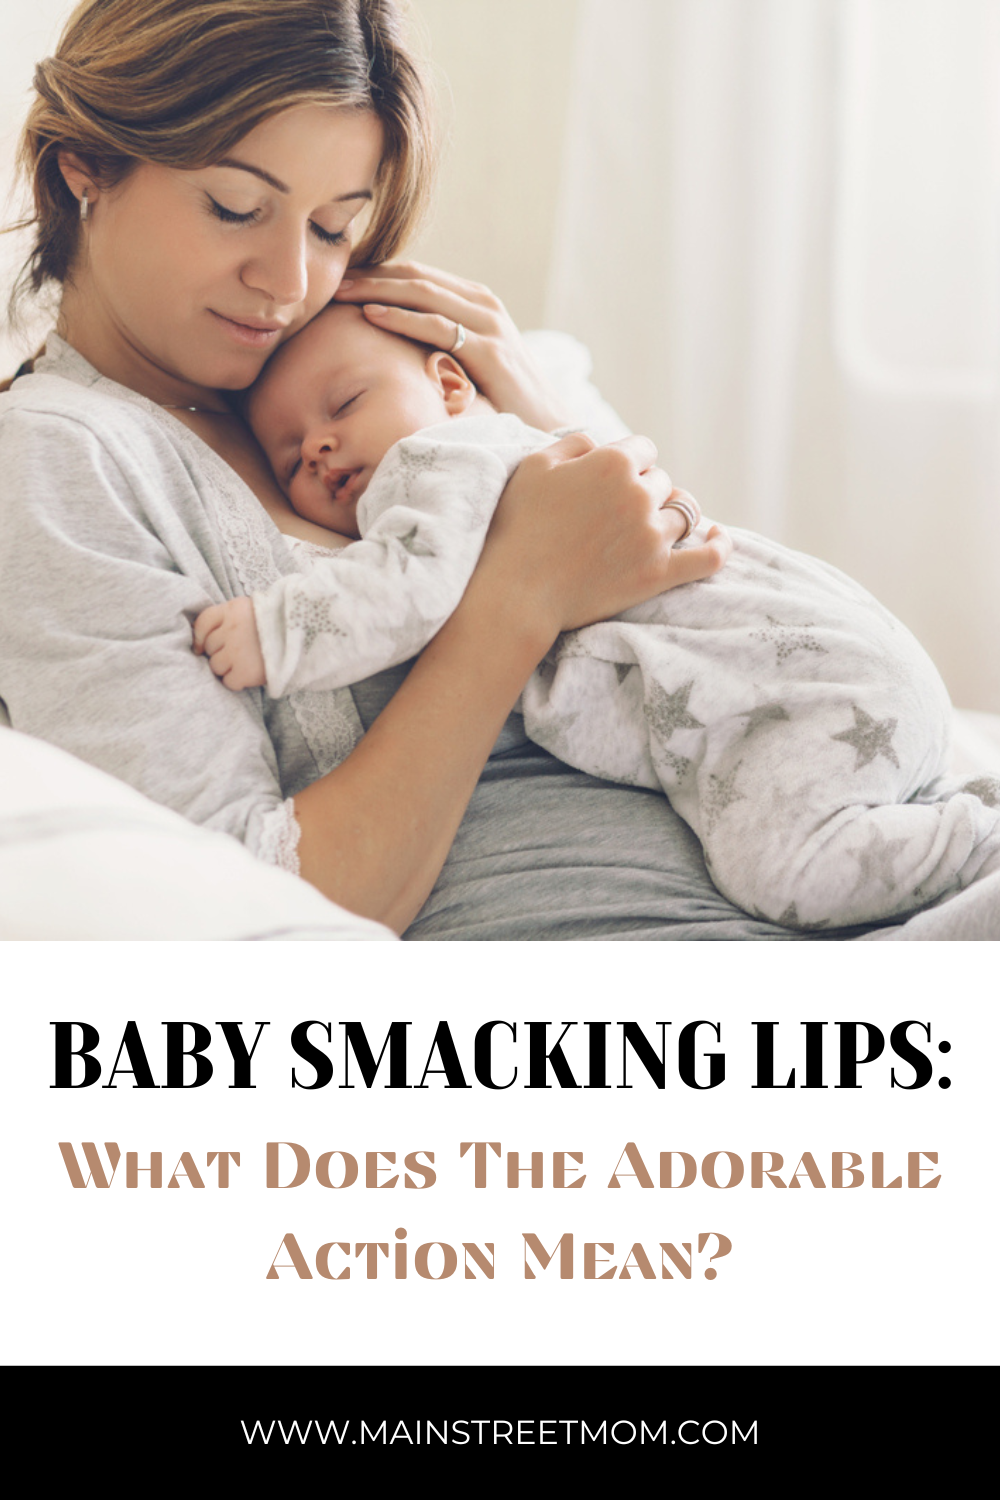 Baby Smacking Lips: What Does The Adorable Action Mean?